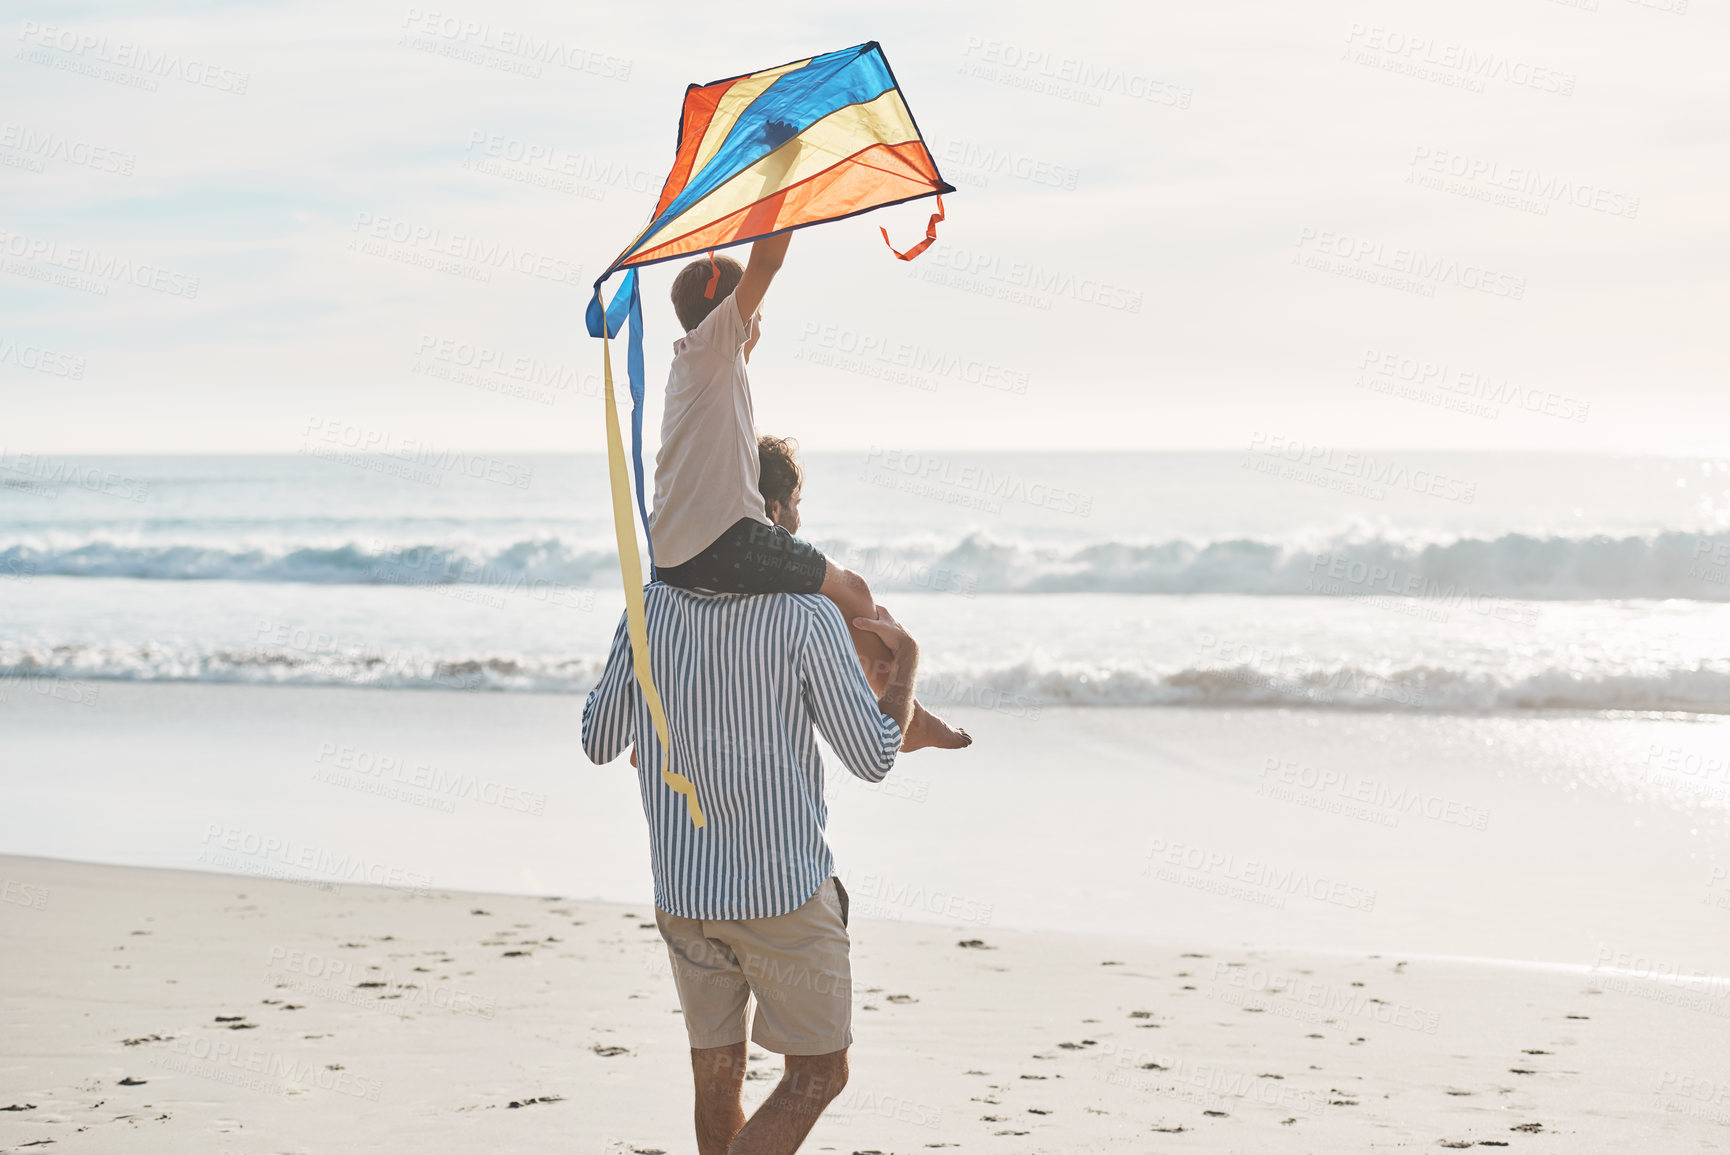 Buy stock photo Rearview shot of a young boy being carried on his father's shoulders and holding a kite on the beach